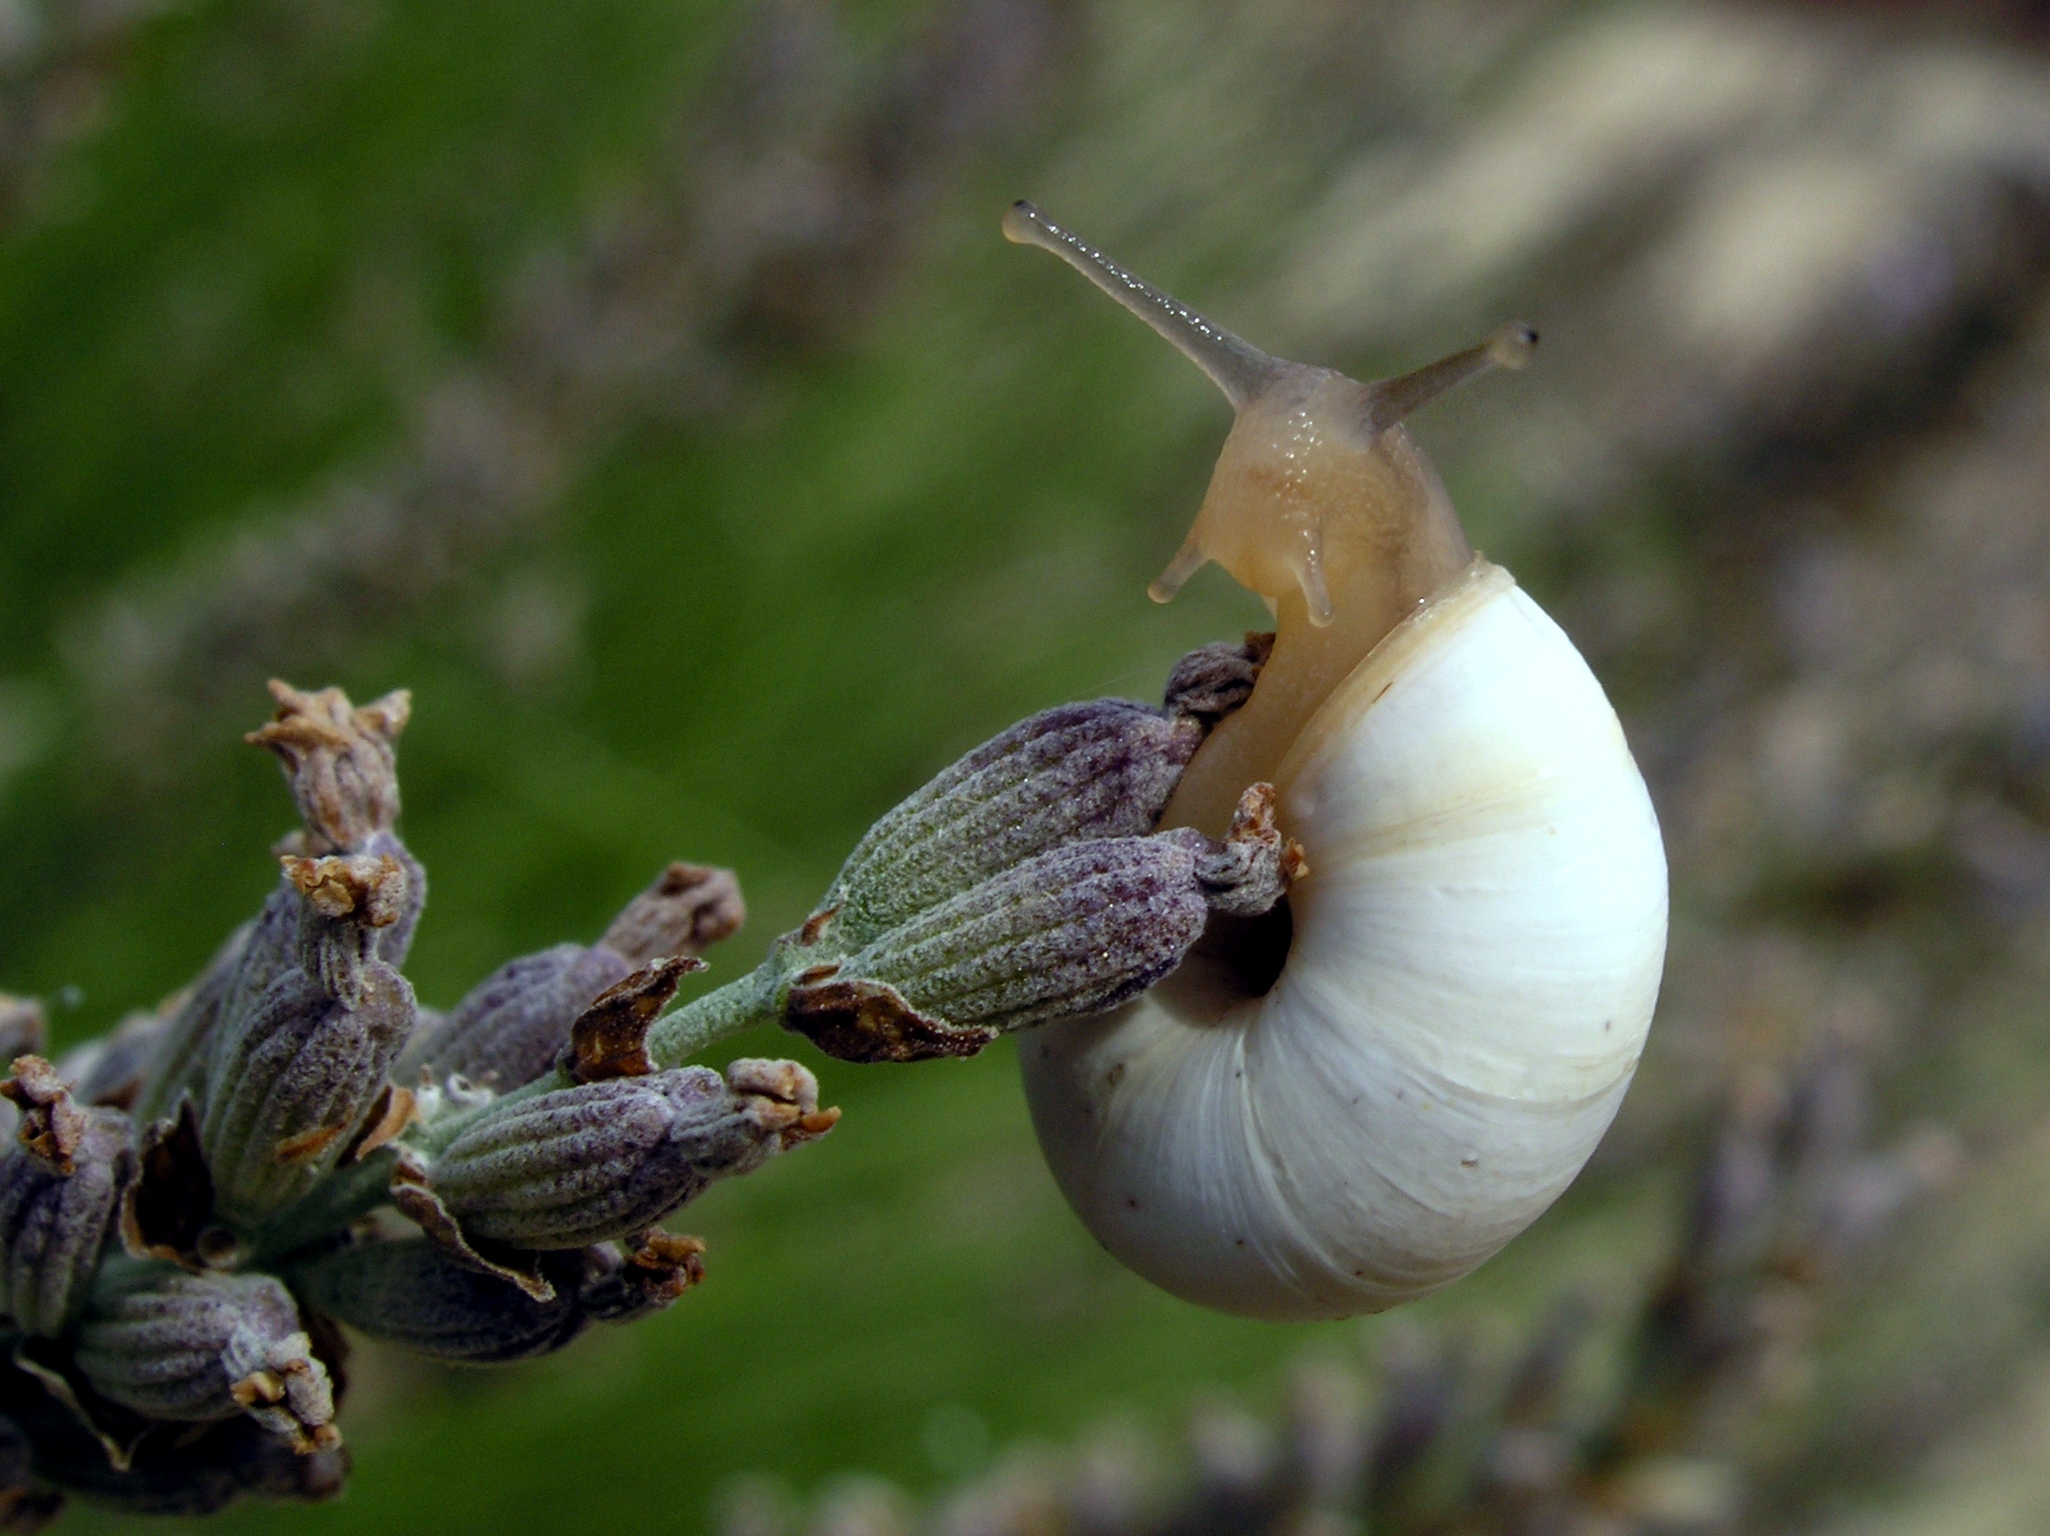 a snail on top of a seed plant